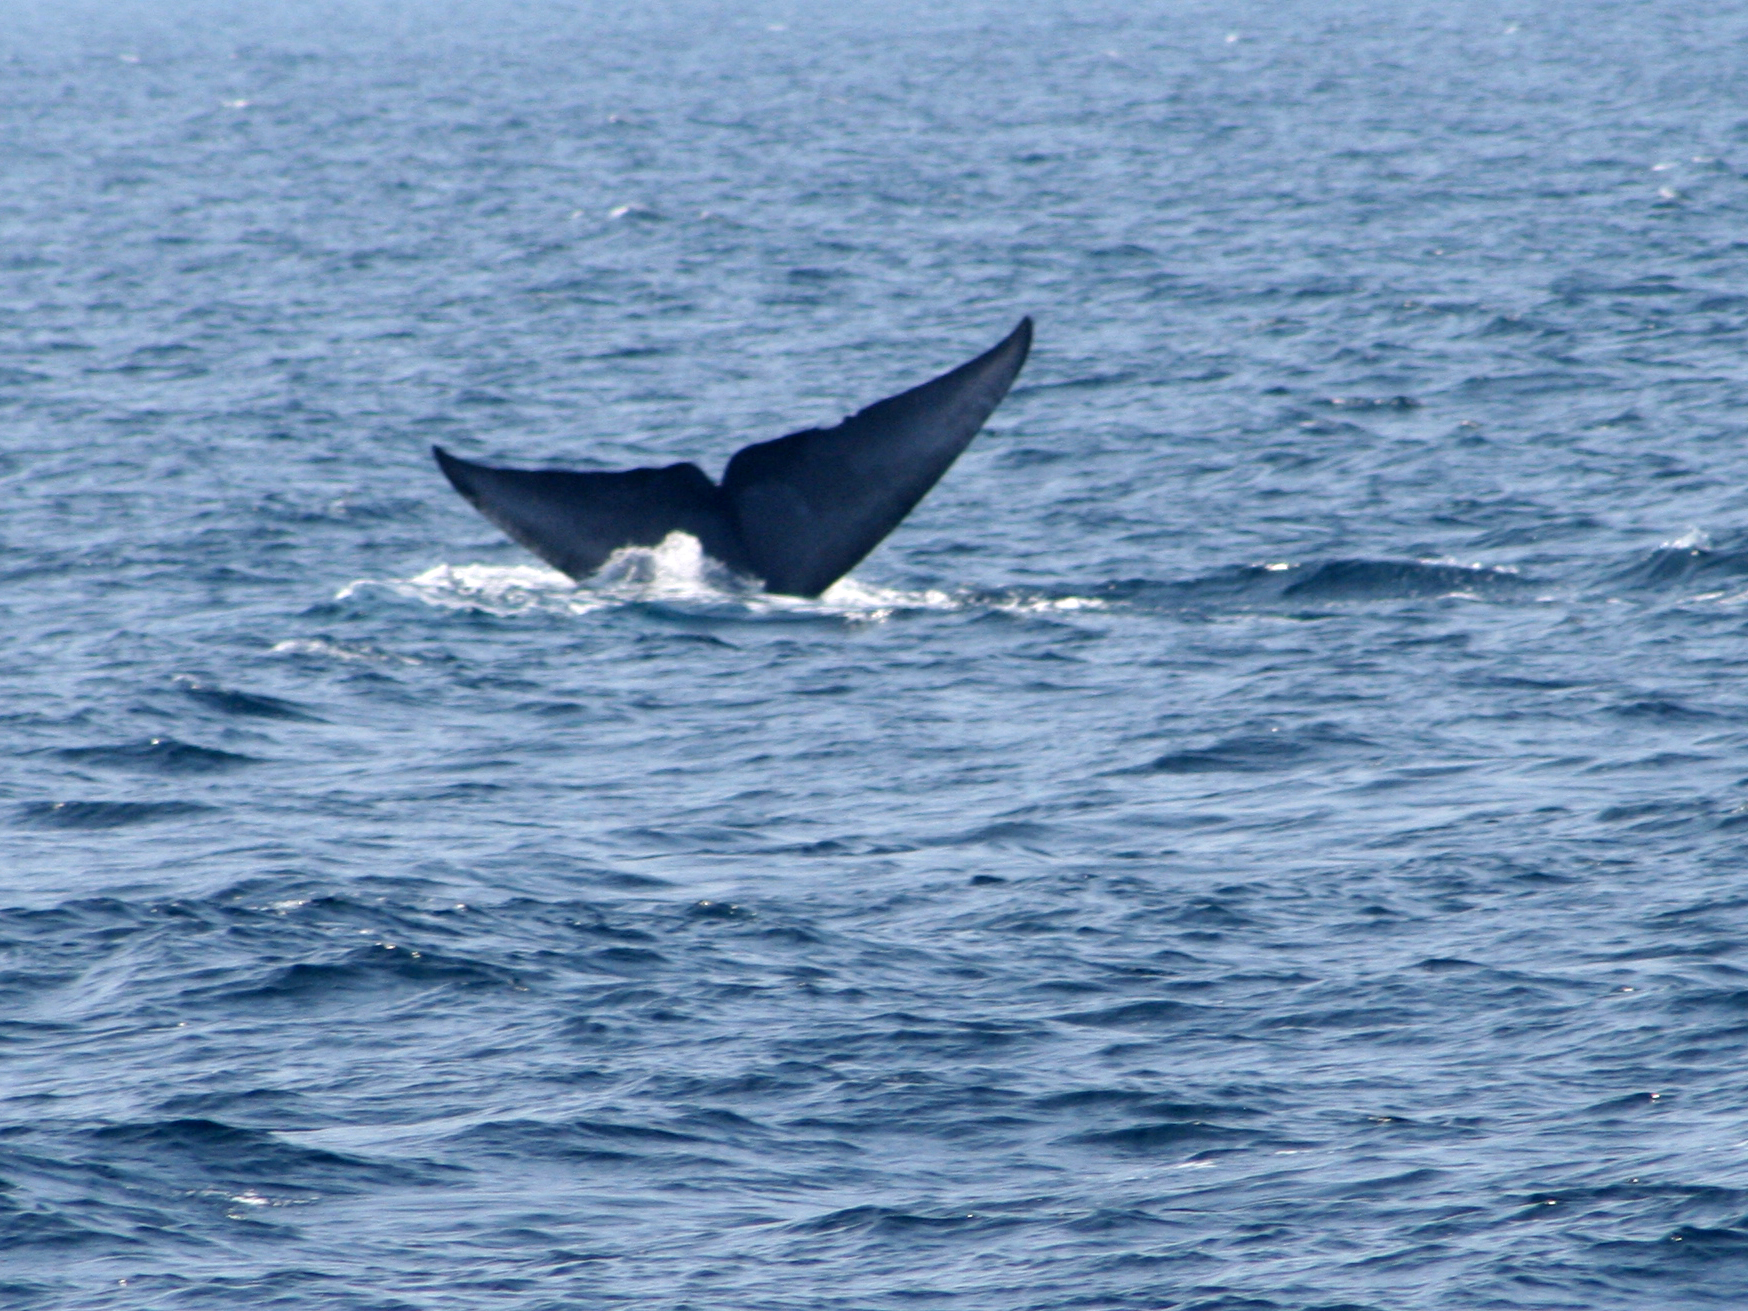 Channel Islands Whale Watching (5) - Doug's Channel Islands Tours